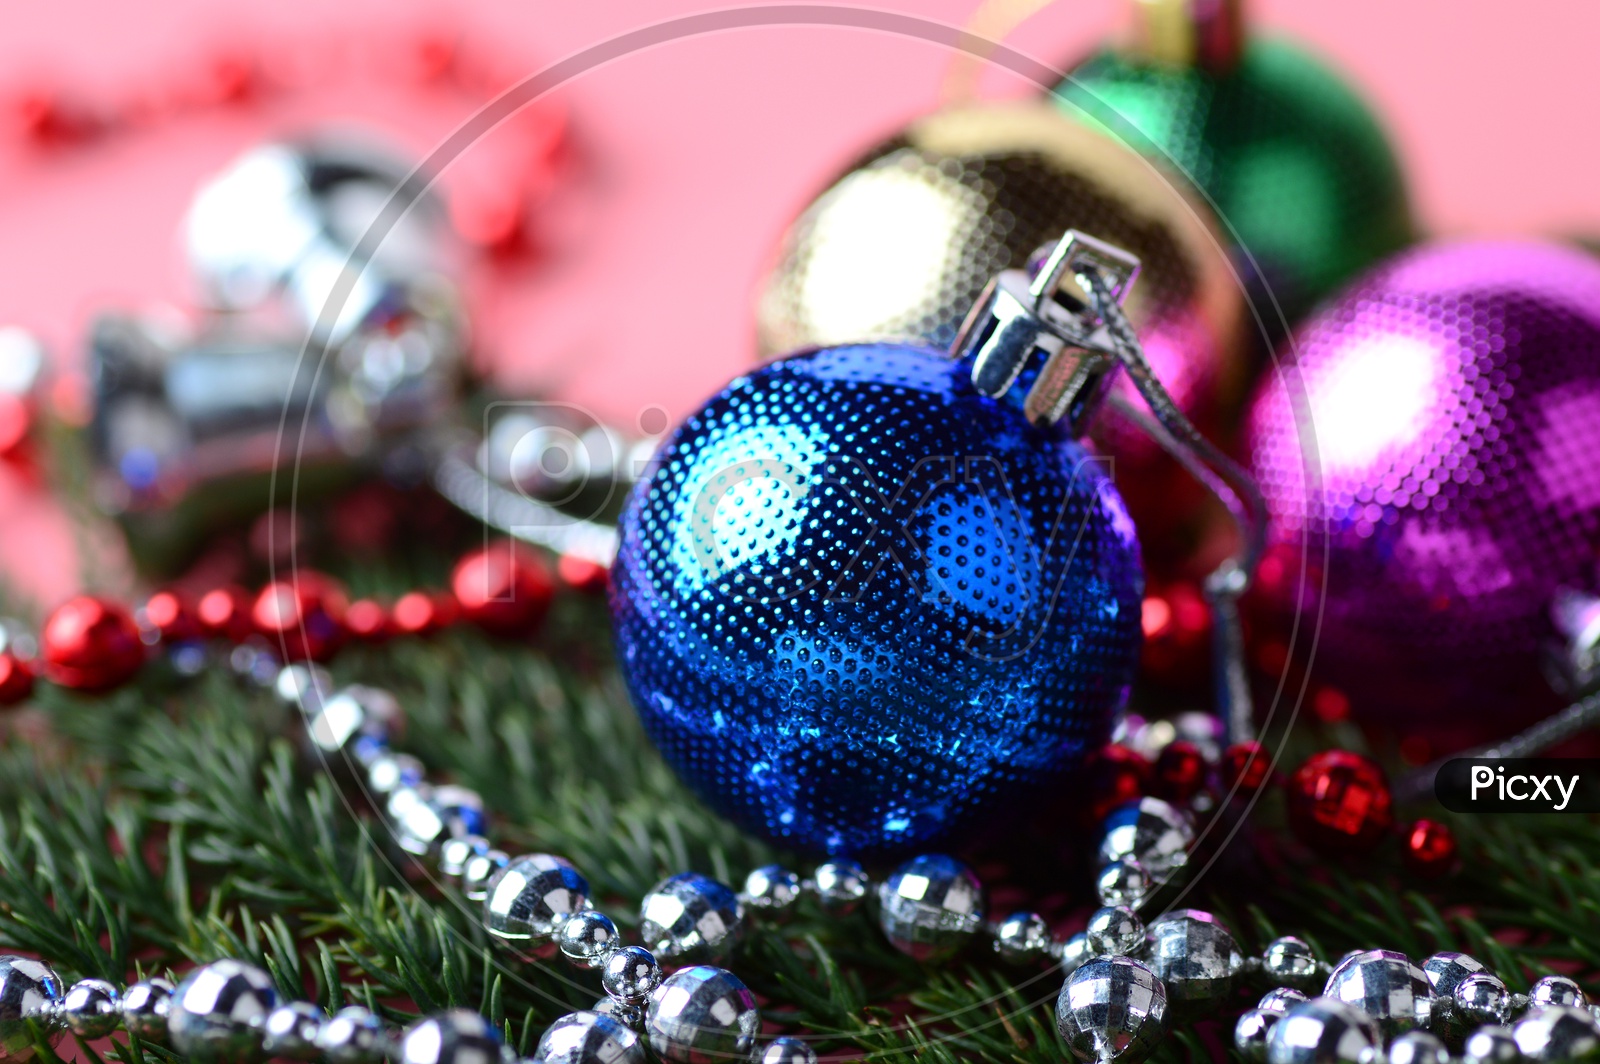 Christmas Tree With Decorated Color Balls And Ornament Chains Filled Background For Christmas Wishes